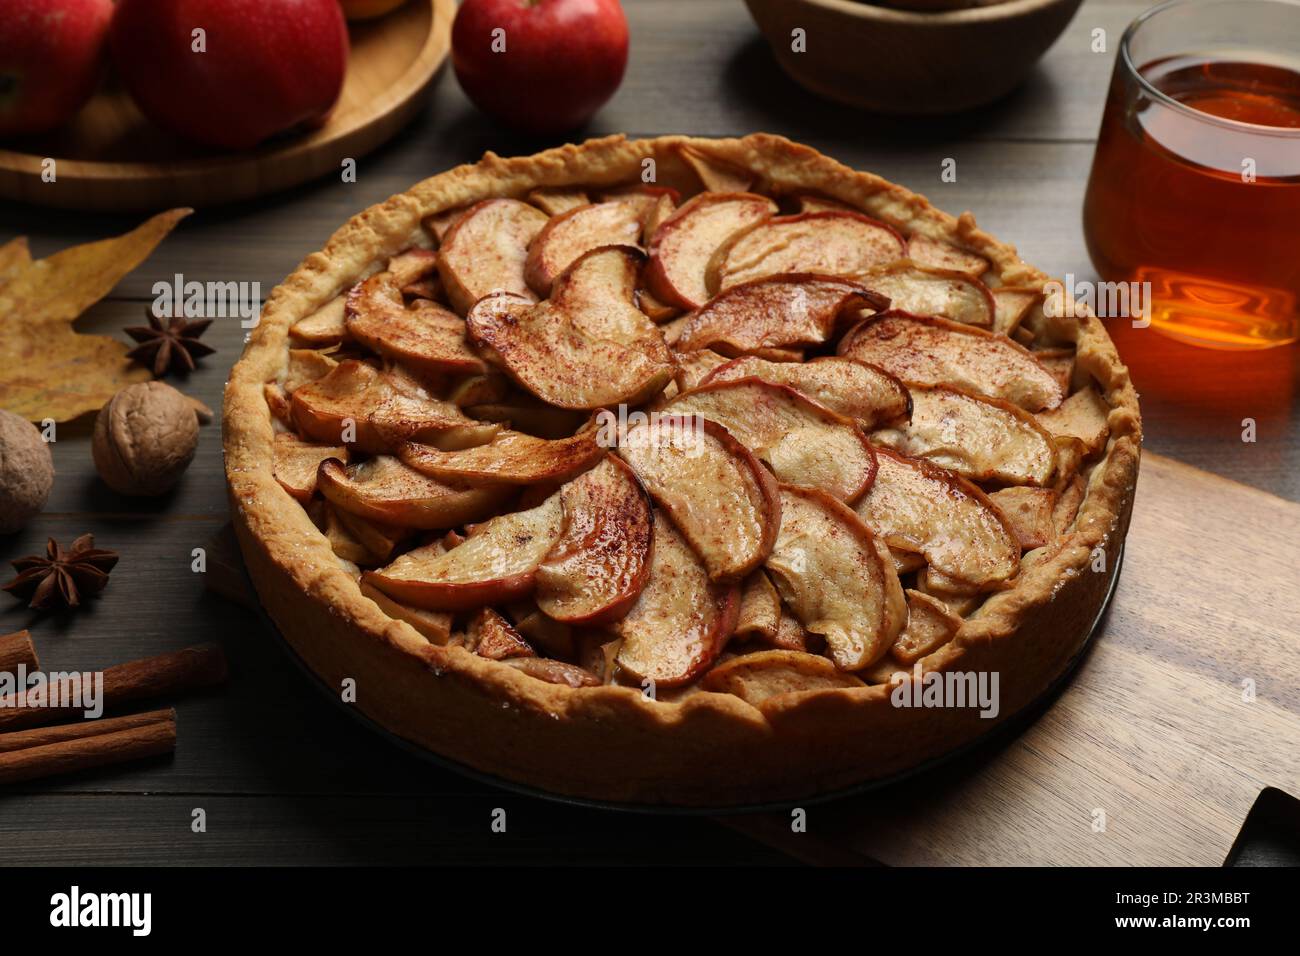 Delicious apple pie, ingredients and cup of tea on wooden table Stock Photo